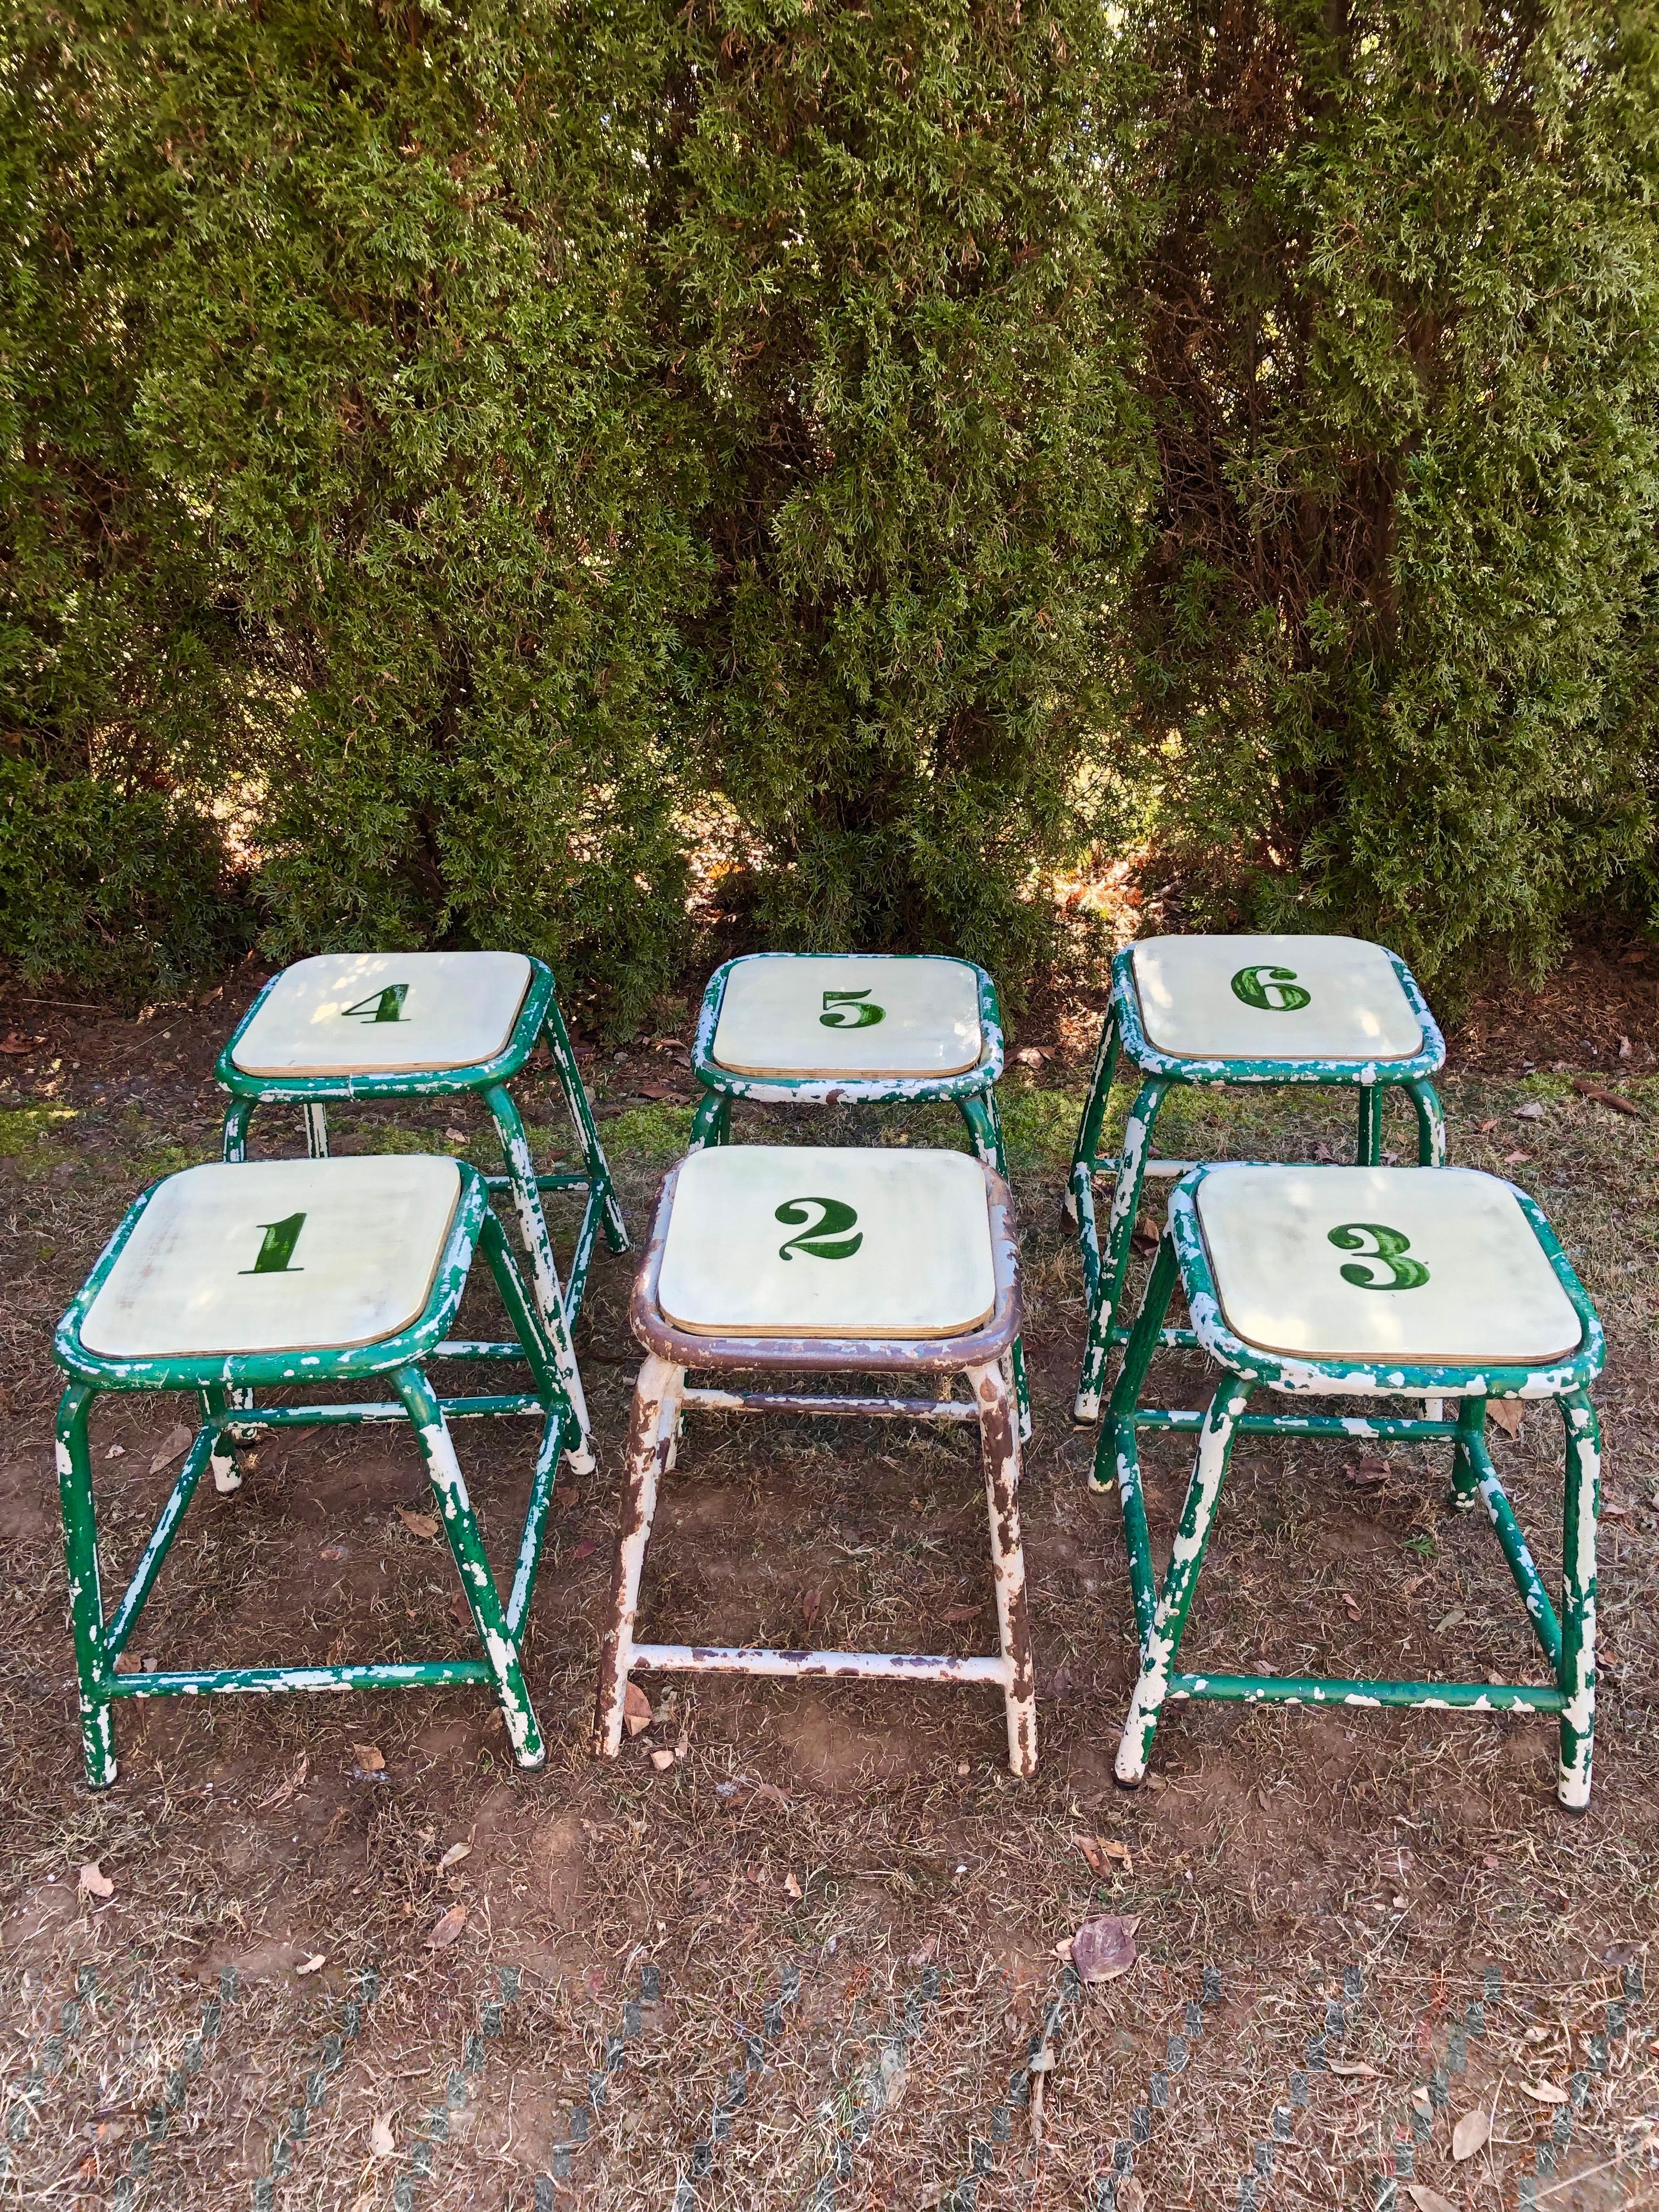 We thought these stools too whimsical and versatile to pass up on our latest buying trip. With frames made from tubular steel by the famous French maker, Tolix, the seats have been replaced with a heavy wood laminate and painted and stenciled with